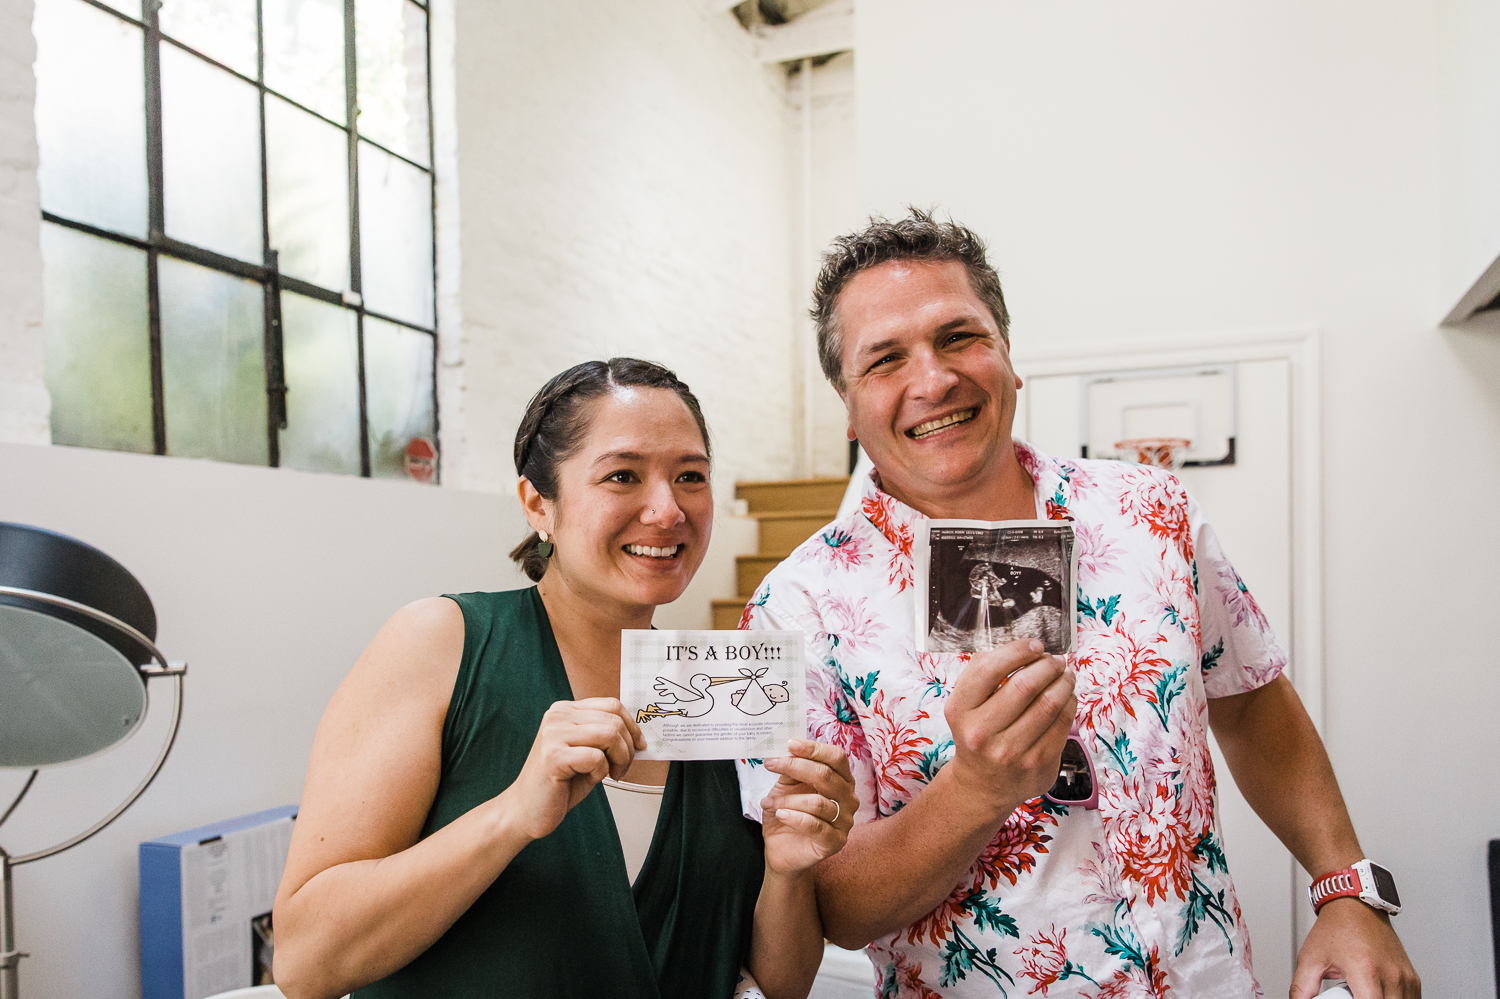 Soon to be parents reveal the gender and ultrasound photo {San Francisco Newborn Photographer}